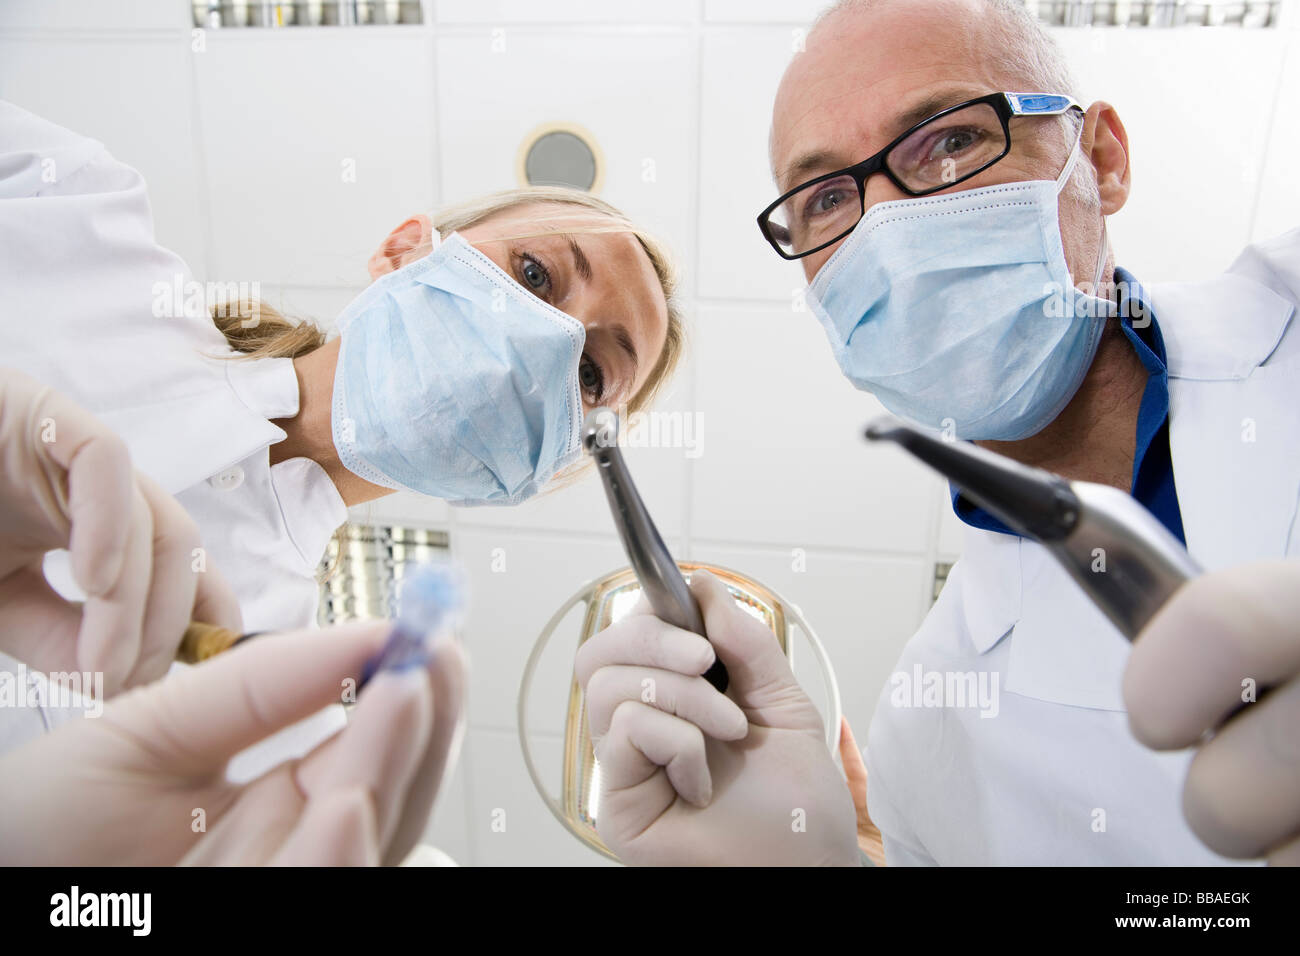 View from below of a dentist and an assistant holding Stock Photo